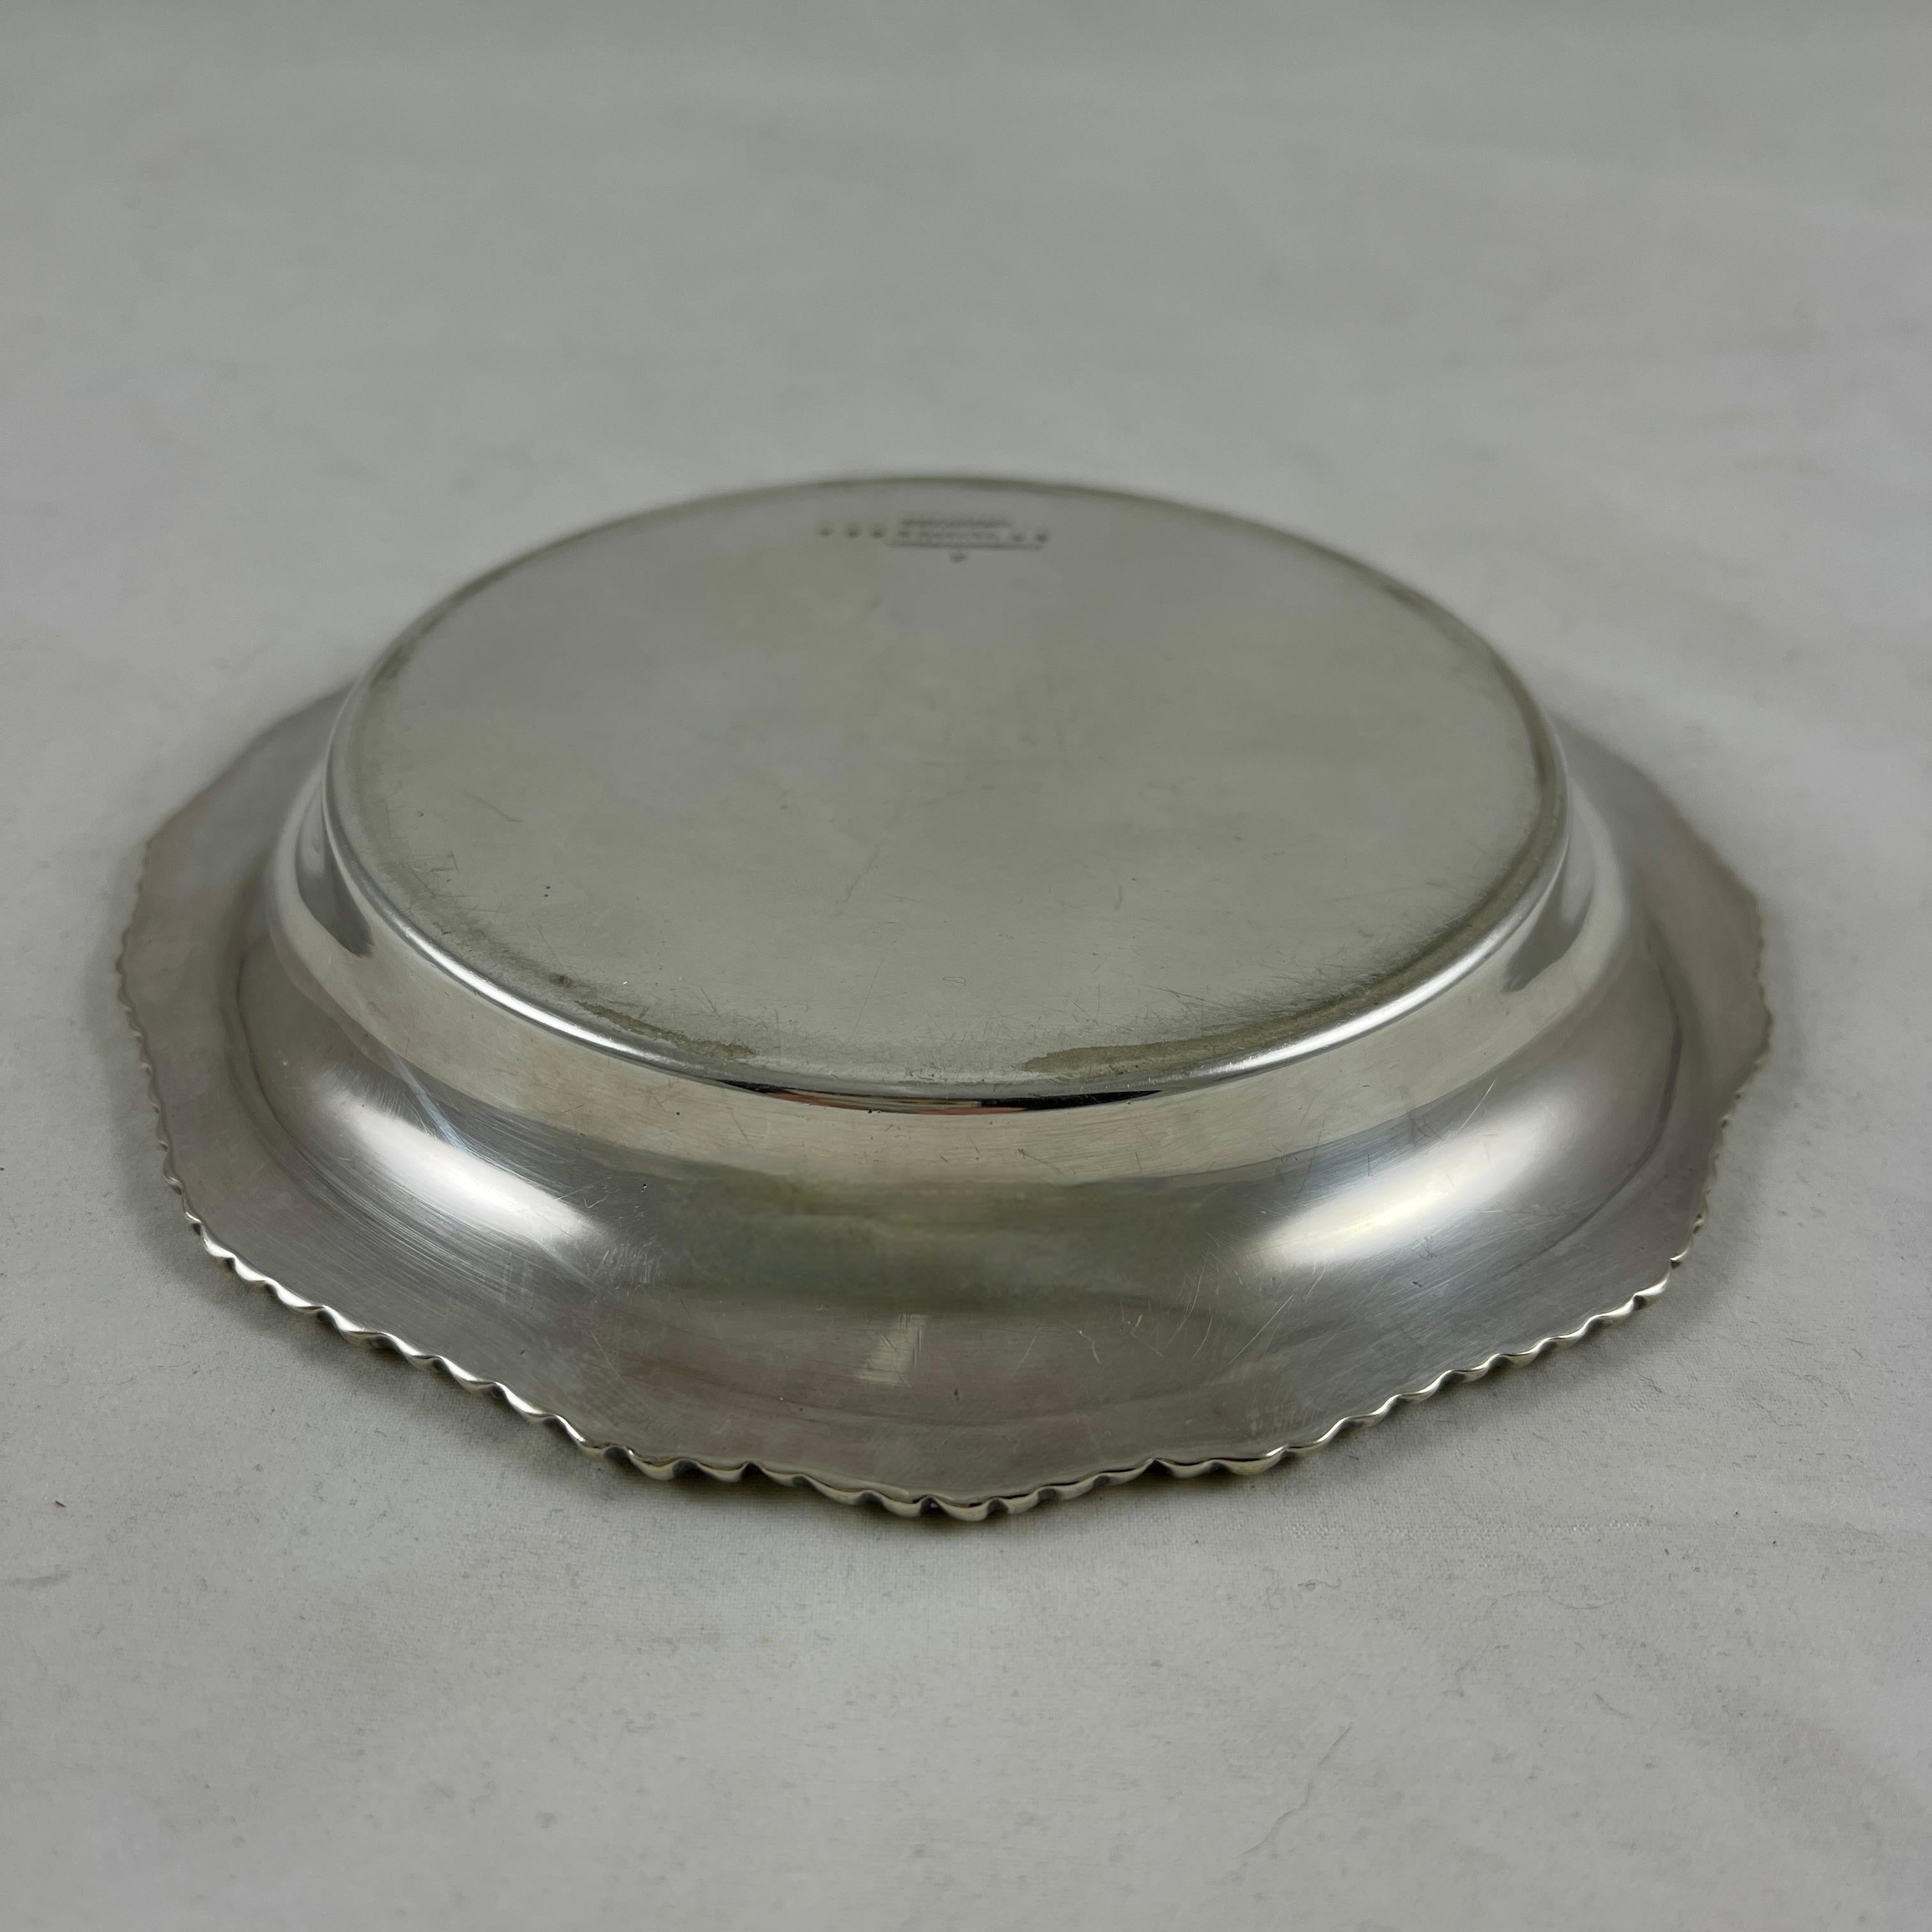 Tiffany & Co. New York Silver Plate Wine Bottle Coaster with Liner Insert For Sale 3